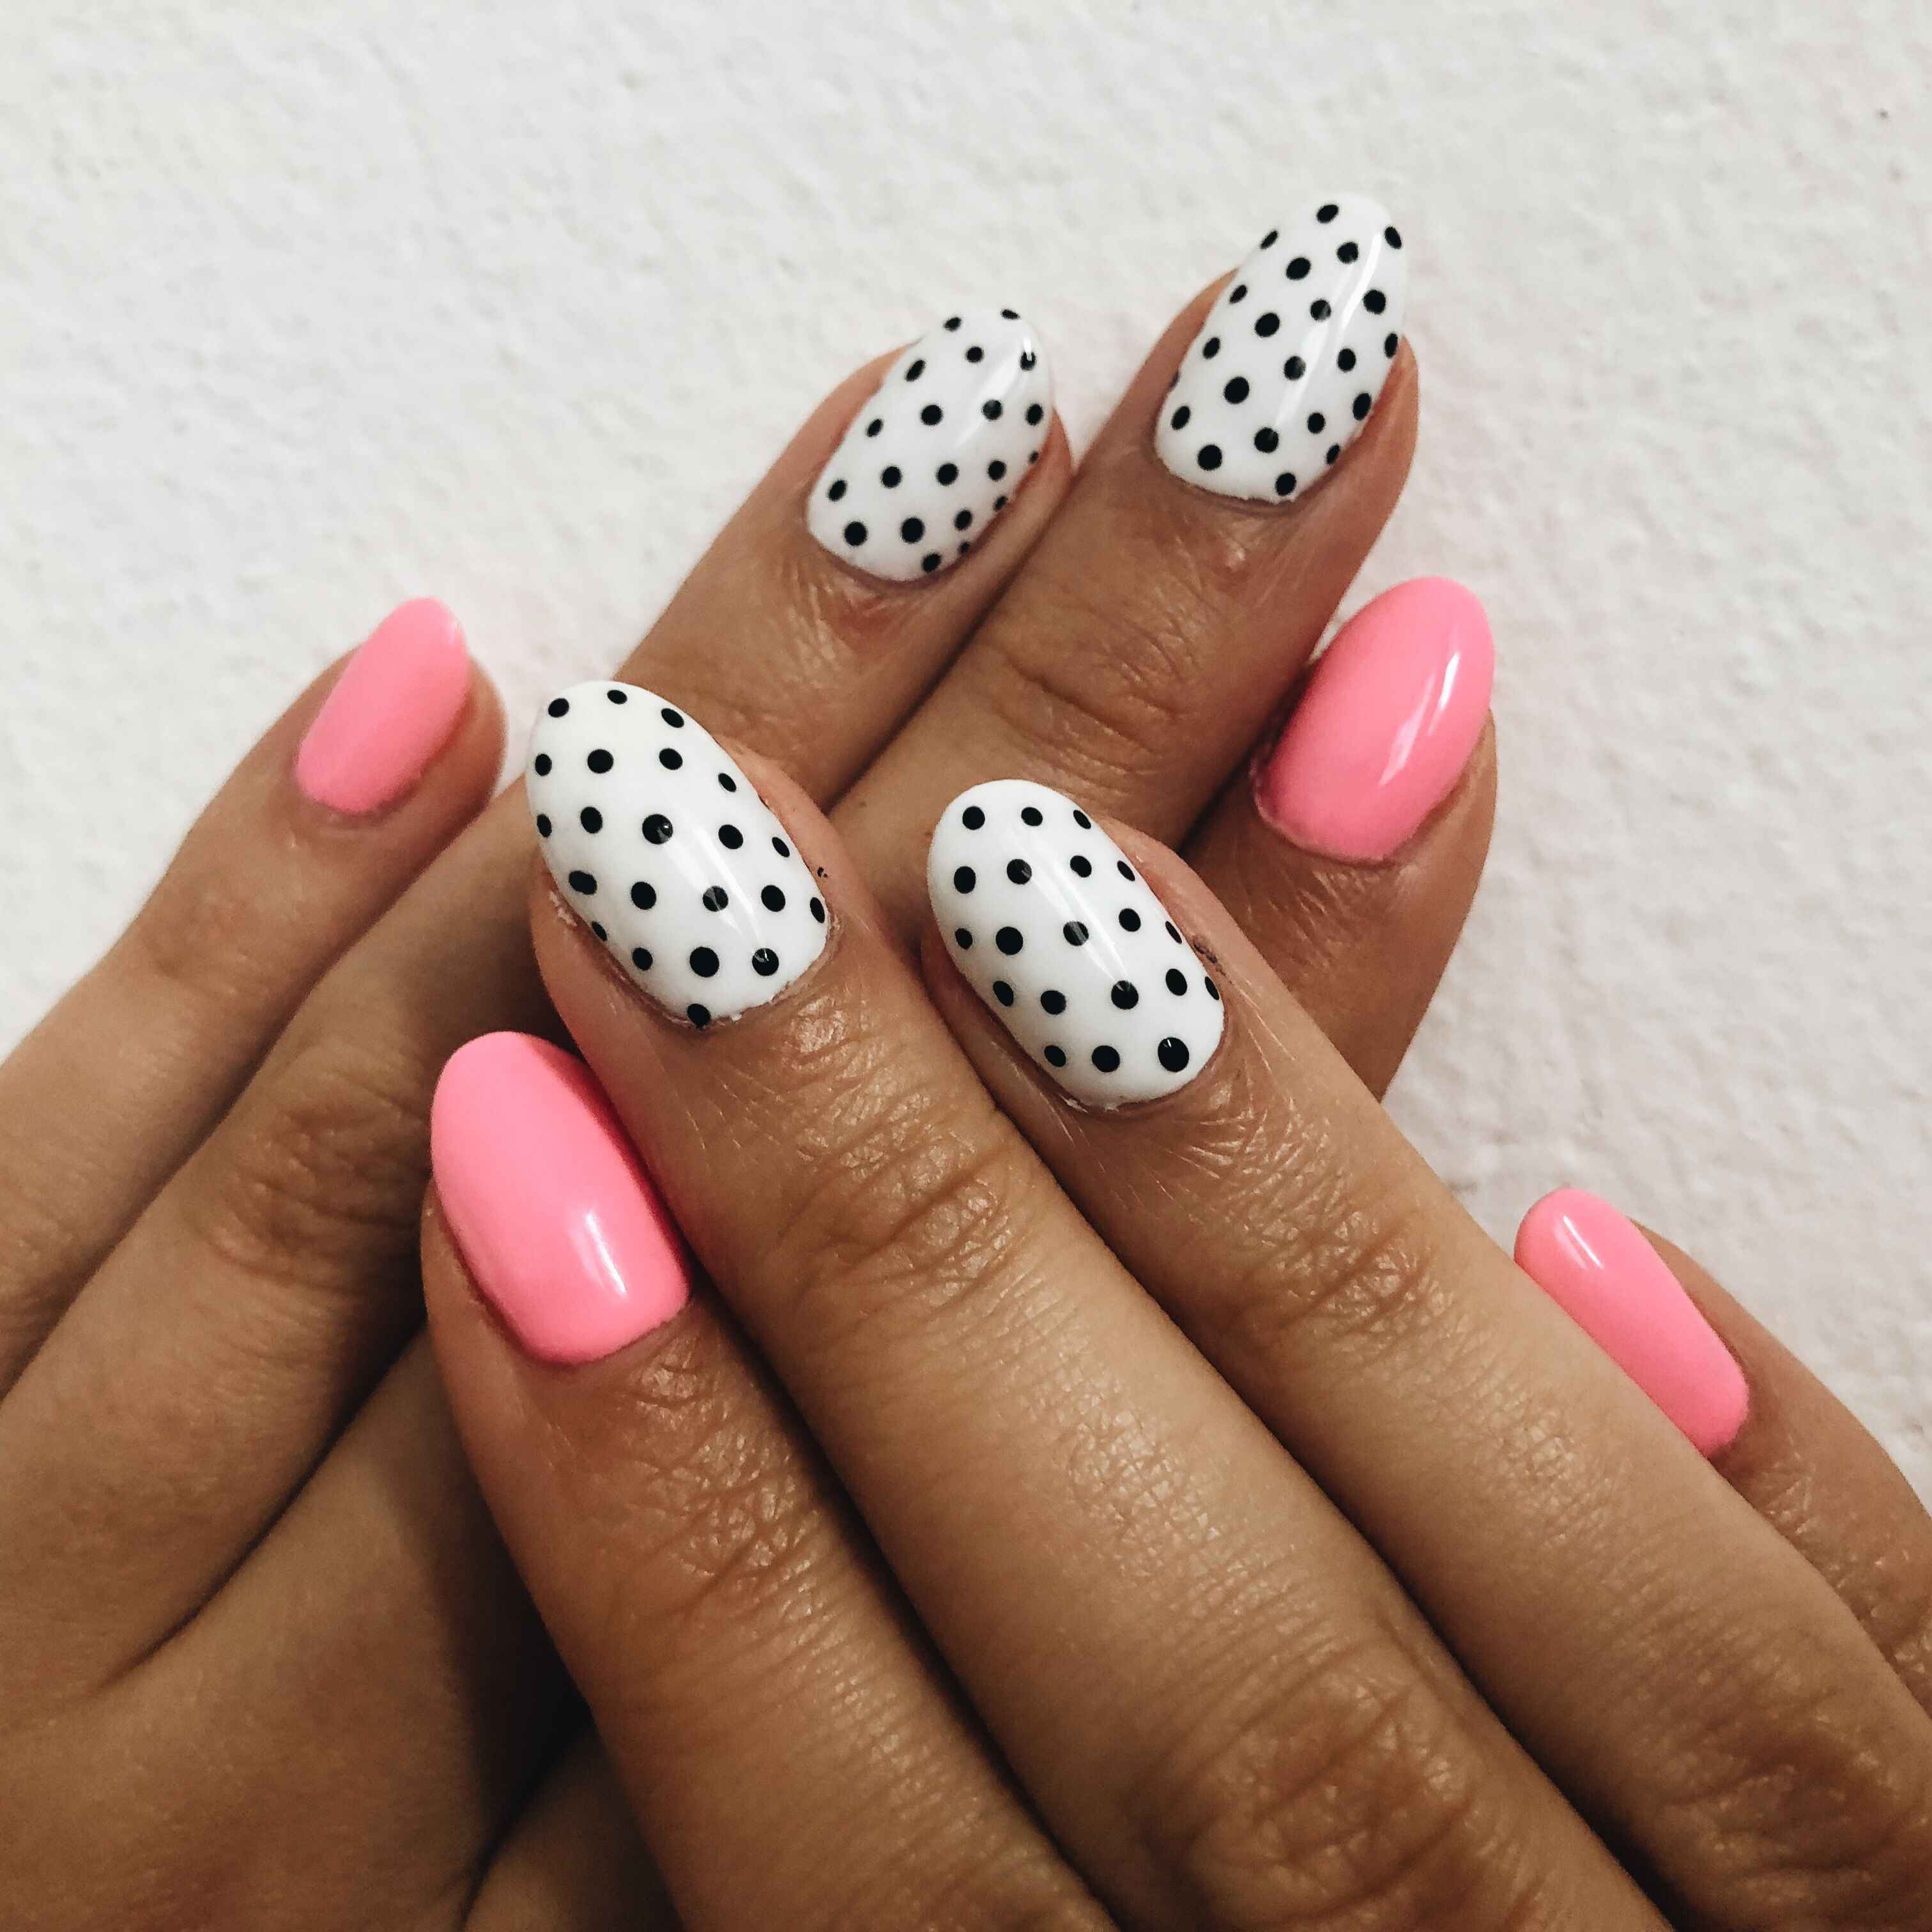 Expert guide to getting gel-based nails: 'Go for hygienic options, opt for  patch test for gel nails' - Times of India